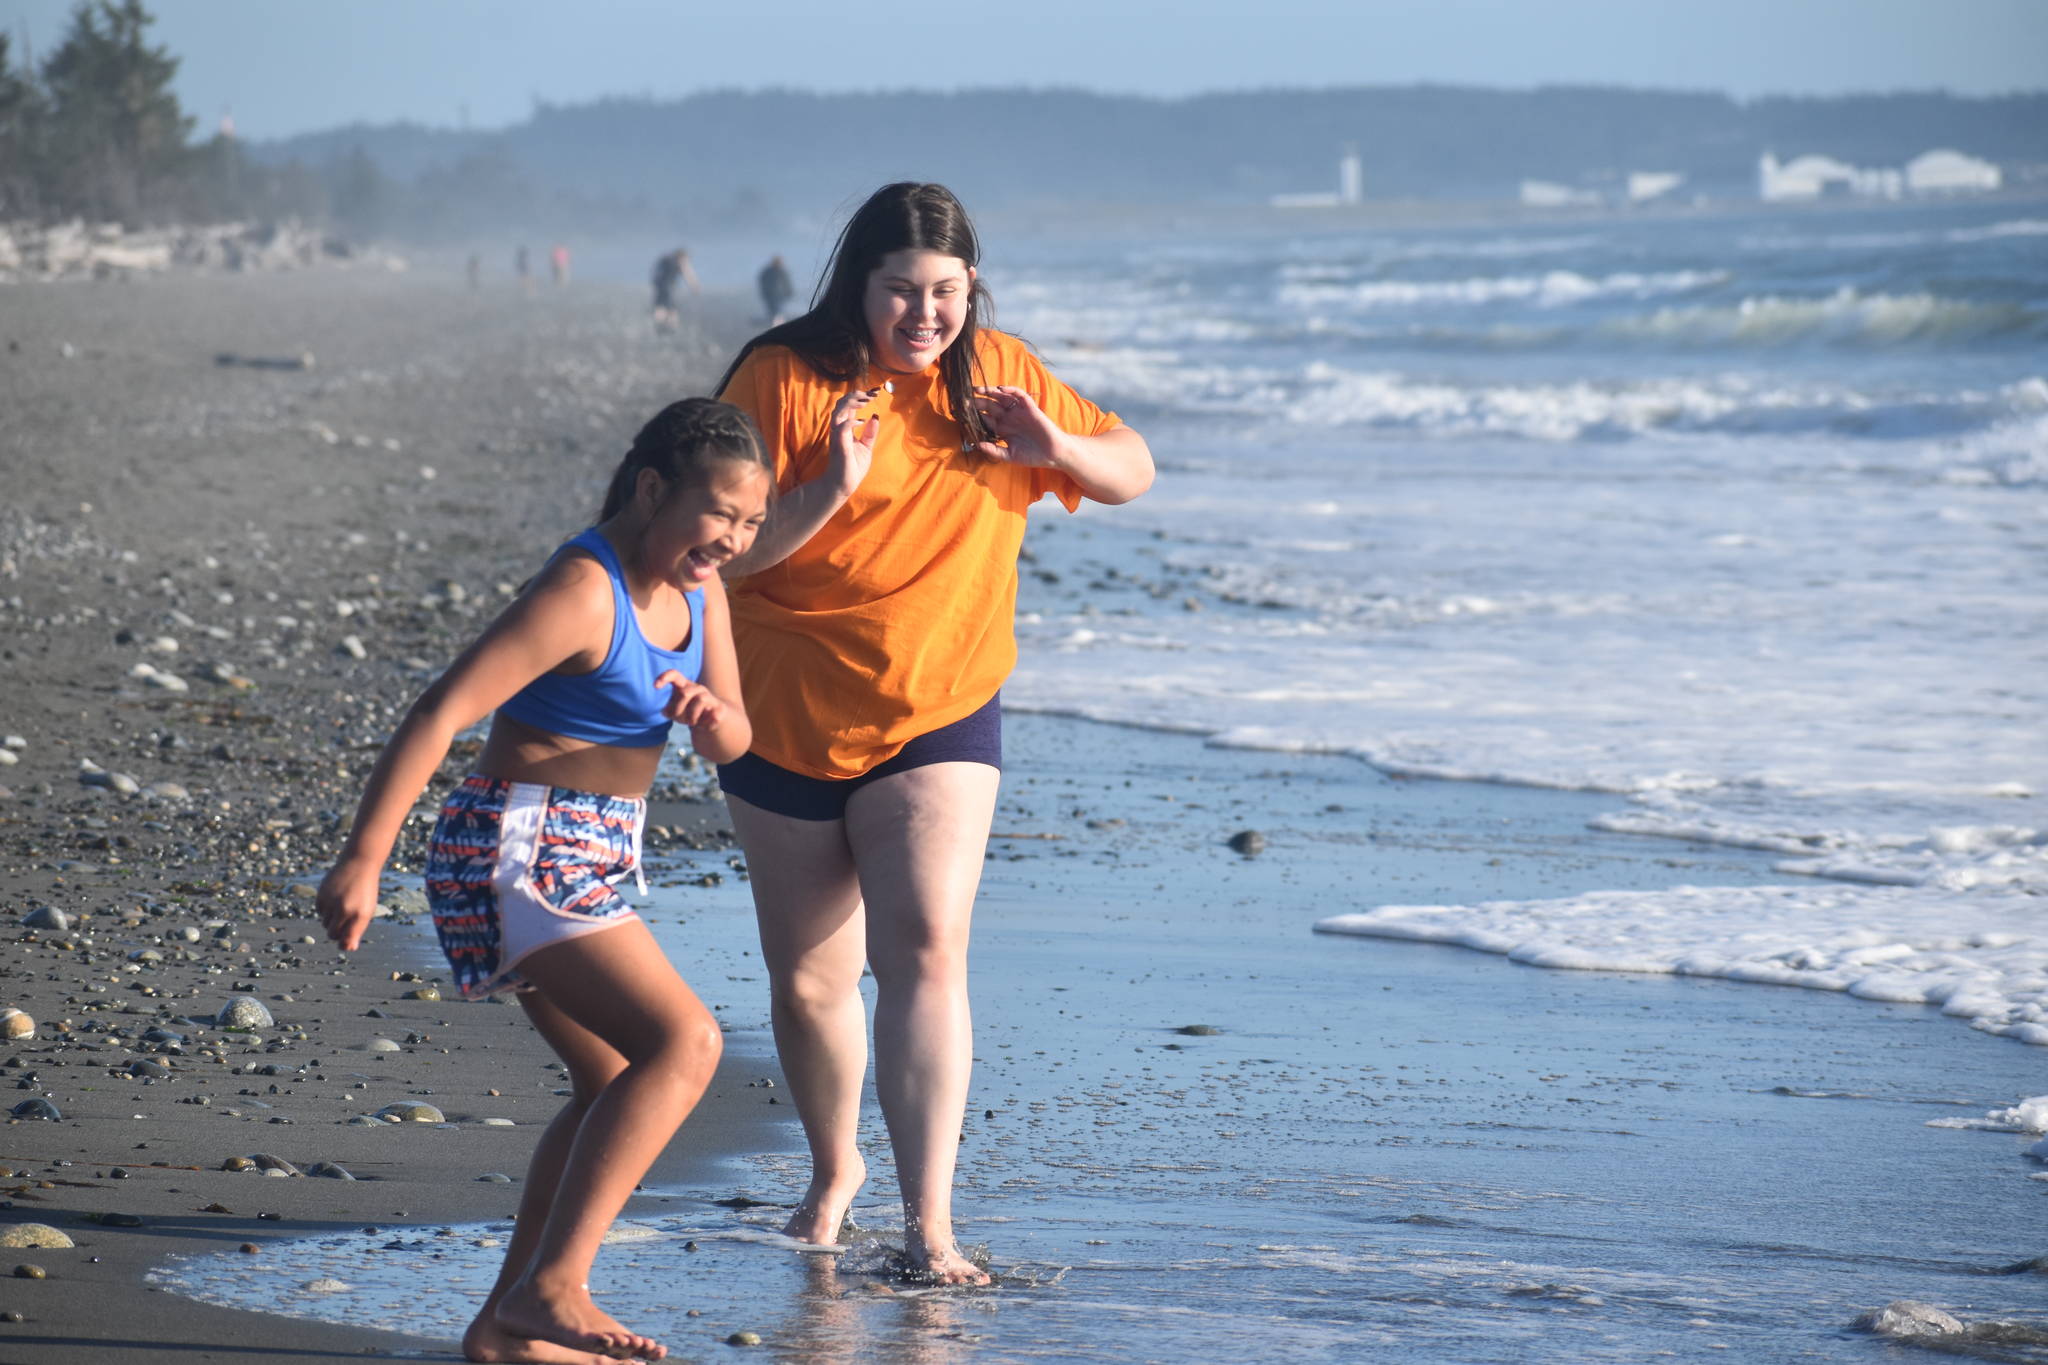 Caraleigh Hernandez, 10, left, and her sister Denelle, 14, play on the beach at Deception Pass State Park. (Photo by Emily Gilbert/Whidbey News-Times)